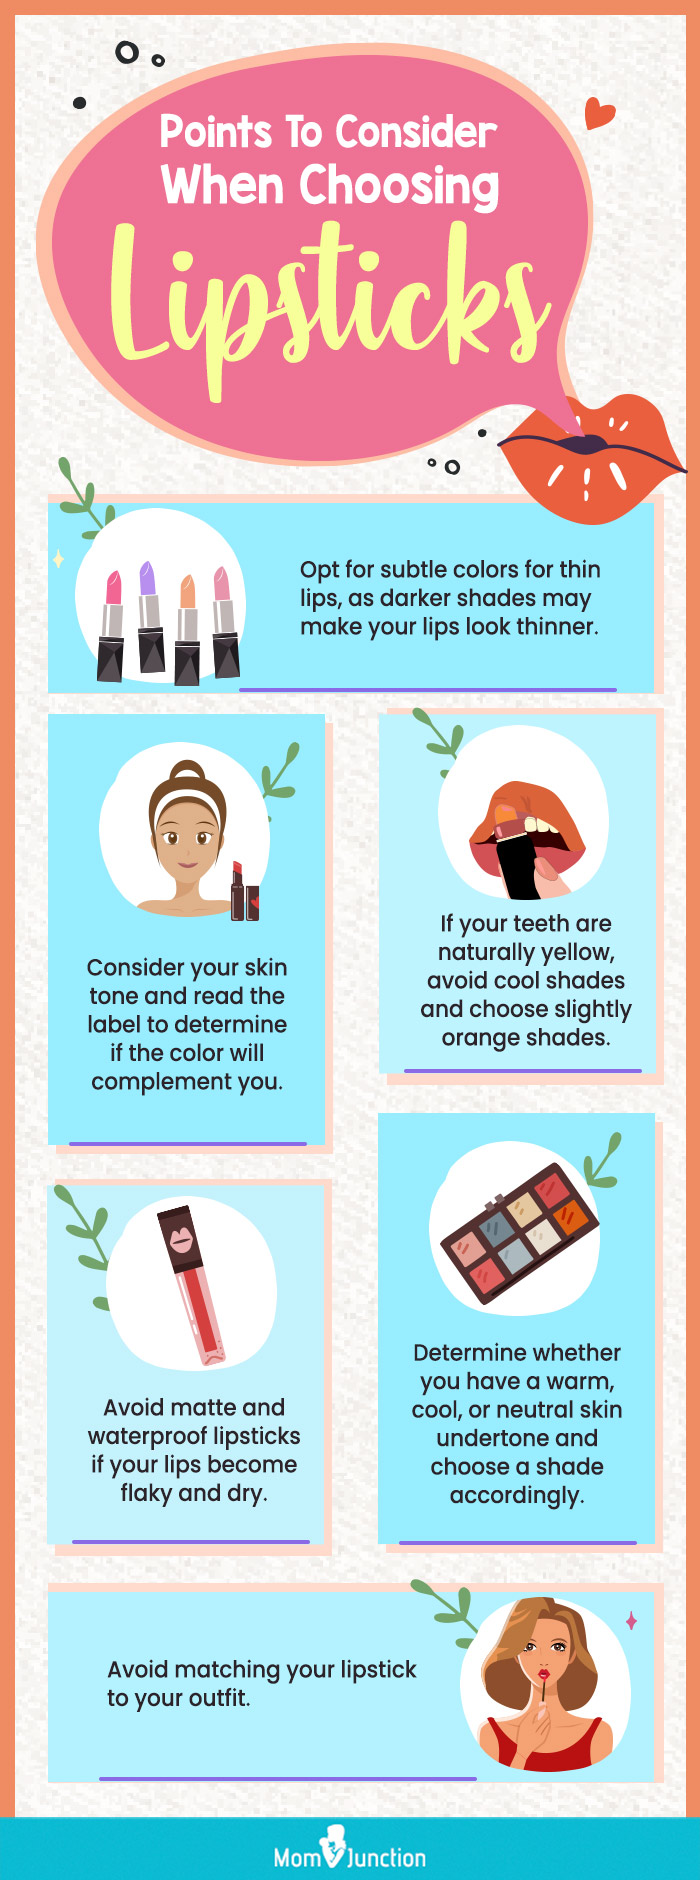 Points-To-Consider-When-Choosing-Lipstick-final (infographic)